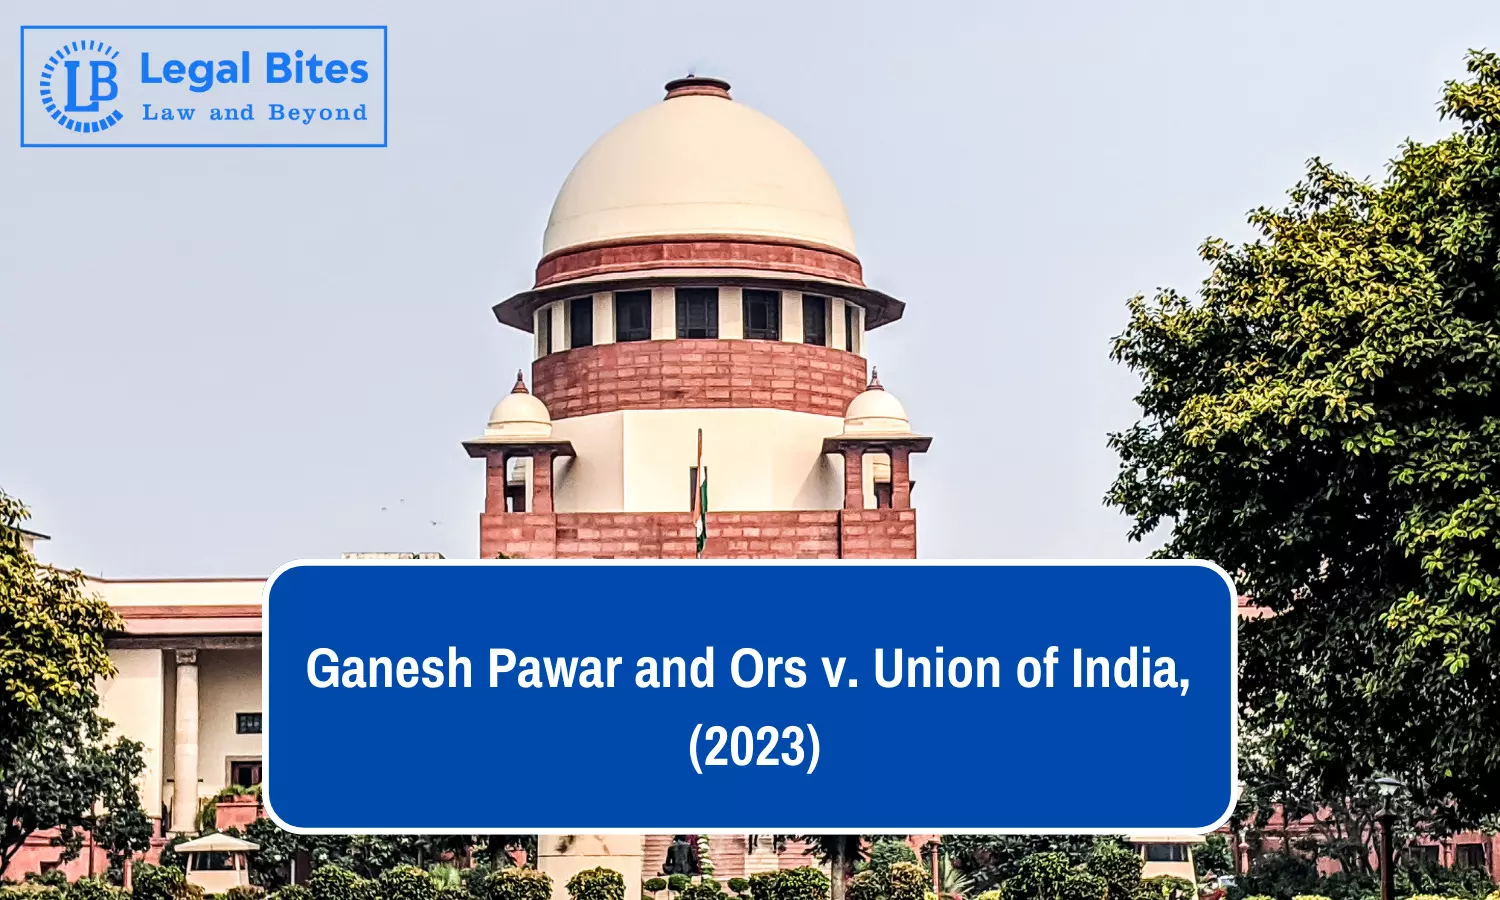 Case Analysis: Ganesh Pawar and Ors v. Union of India, (2023) | NEET-PG 2023